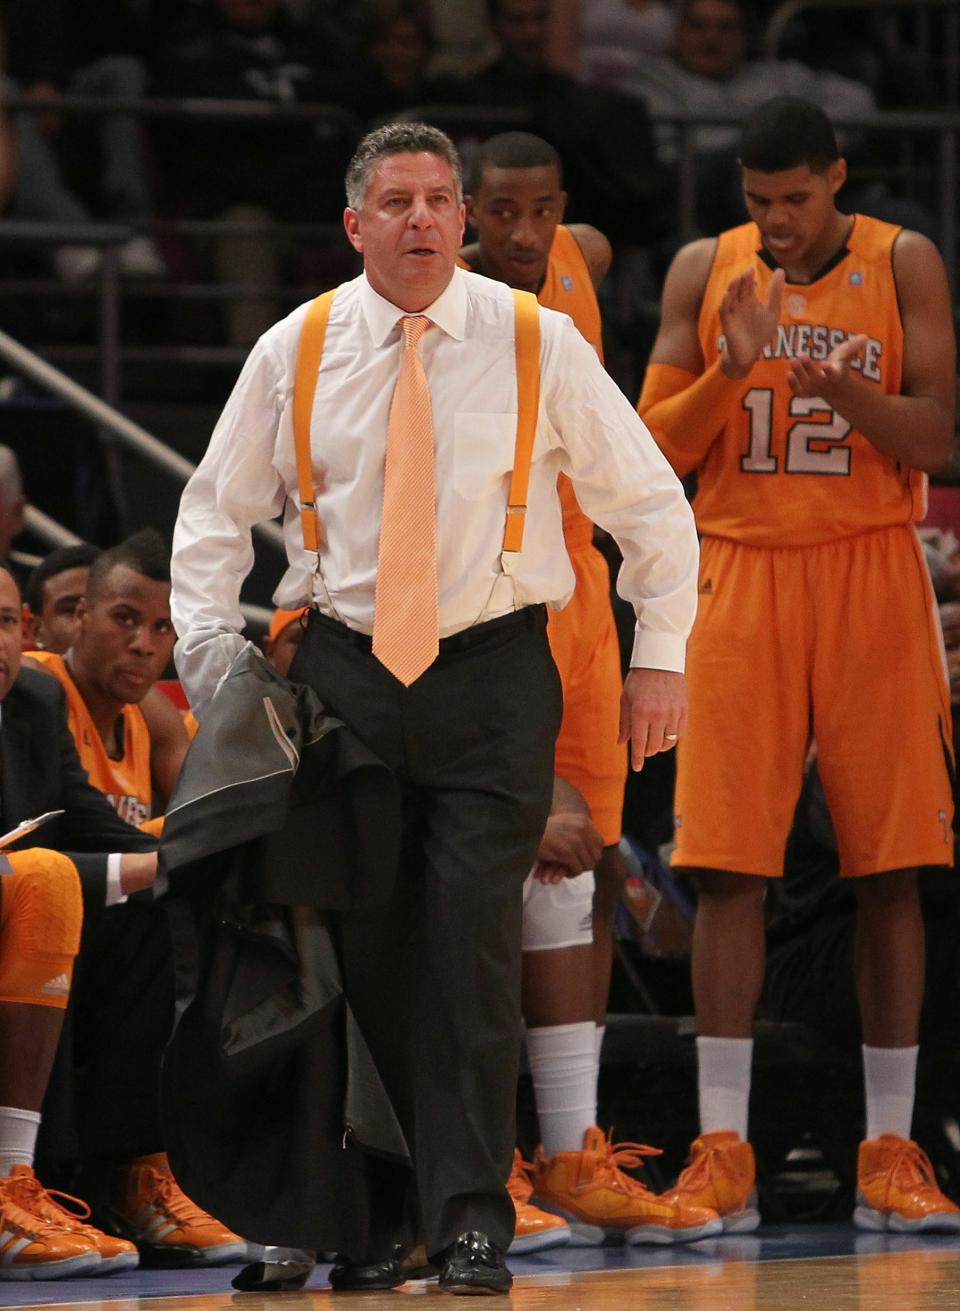 NEW YORK - NOVEMBER 26: Head coach of the Tennessee Volunteers Bruce Pearl on the sideline against the Villanova Wildcats during the Championship game at Madison Square Garden on November 26, 2010 in New York City. (Photo by Nick Laham/Getty Images)